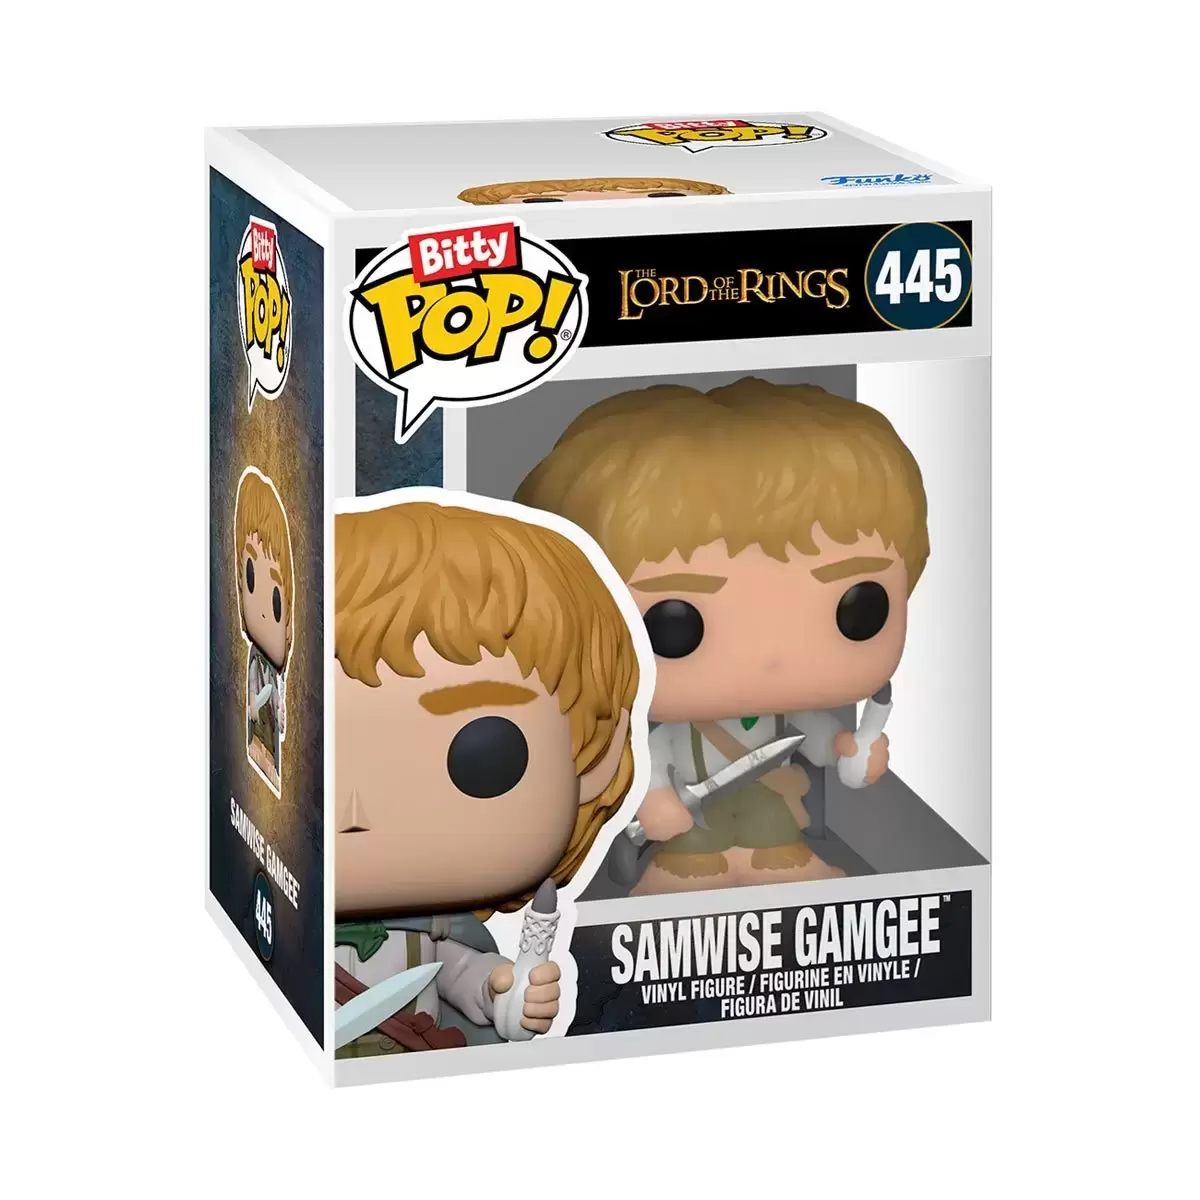 Bitty POP! - Lord of The Rings - Samwise Gamgee